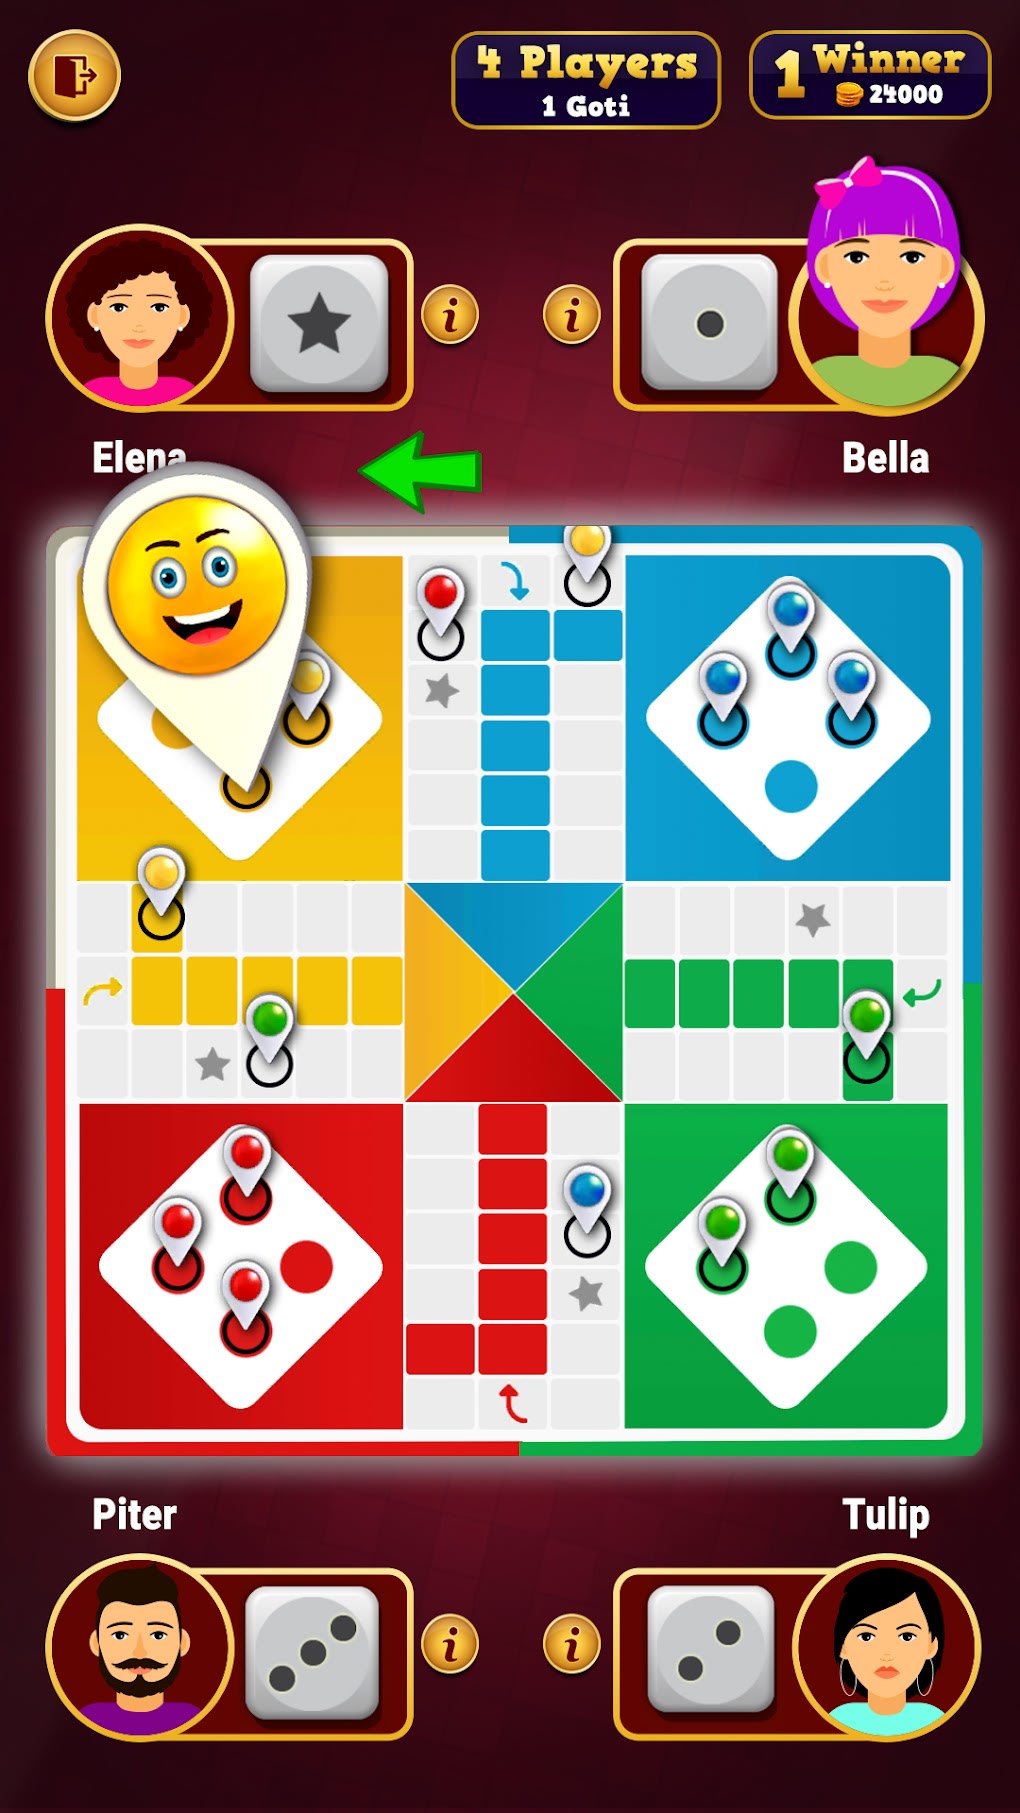 Ludo King Gets Quick Ludo, Up to Six Player Online Multiplayer Modes